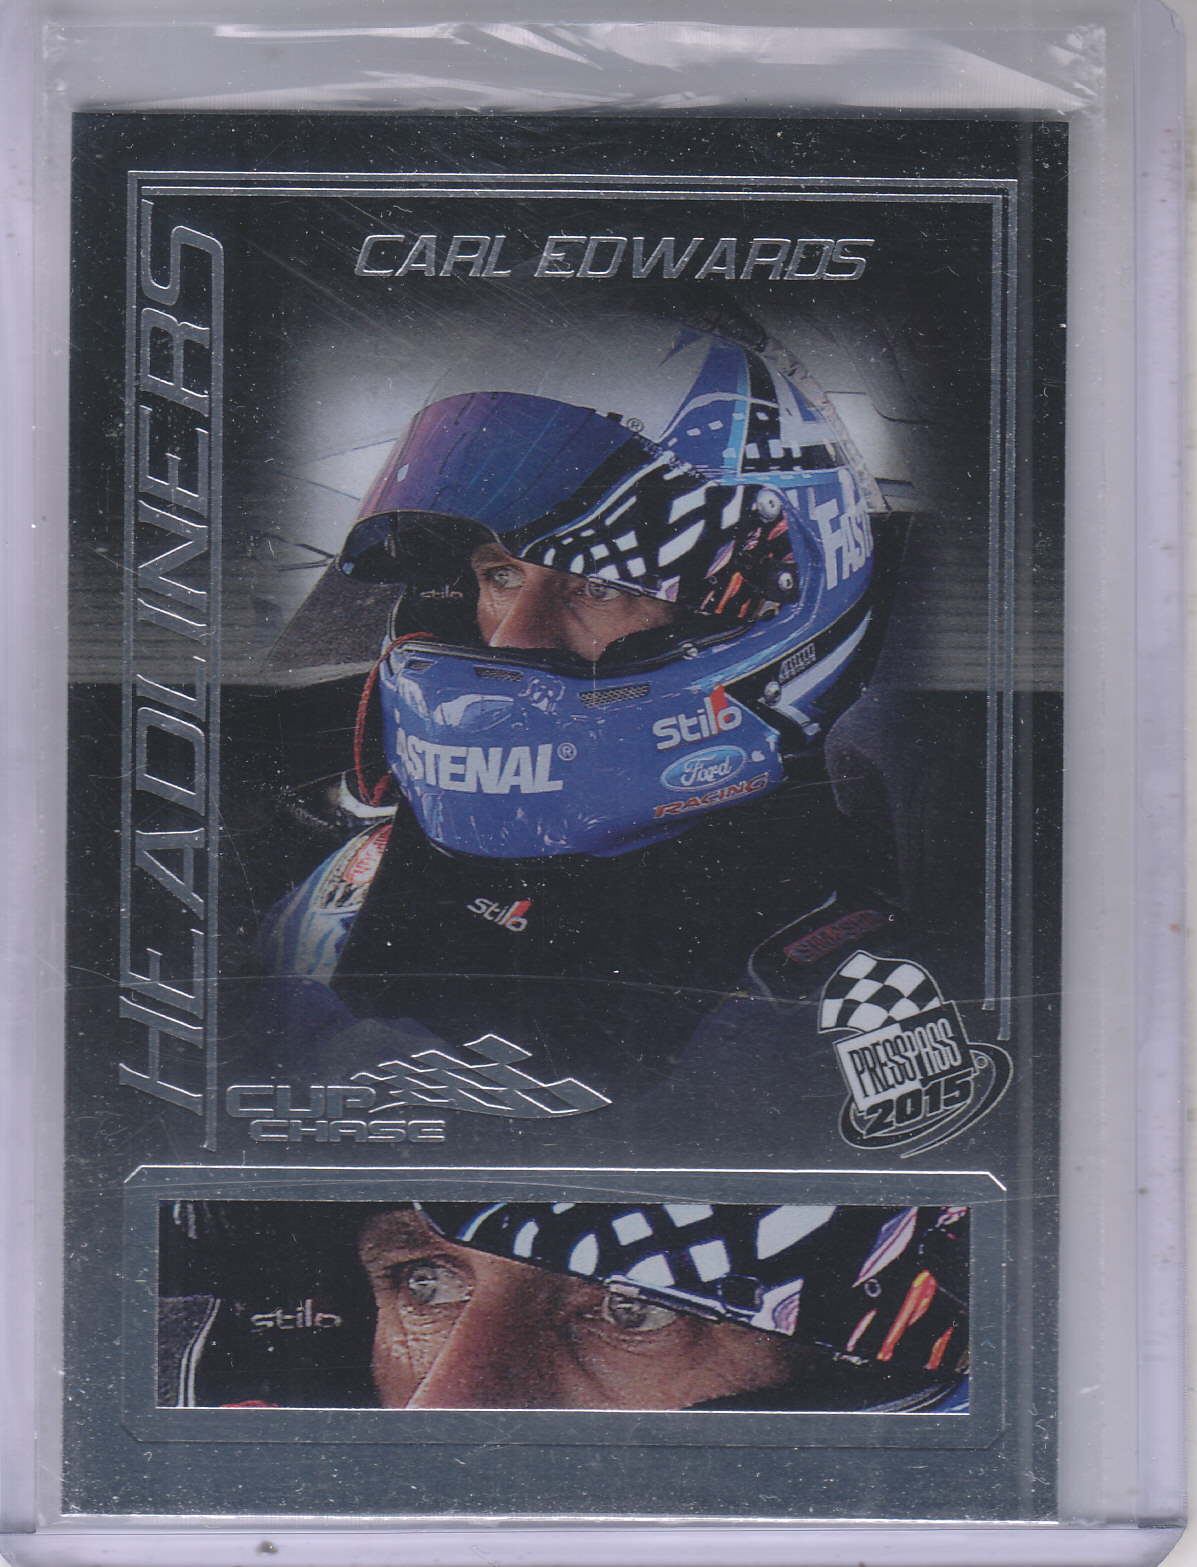 2015 Press Pass Cup Chase #66 Carl Edwards H